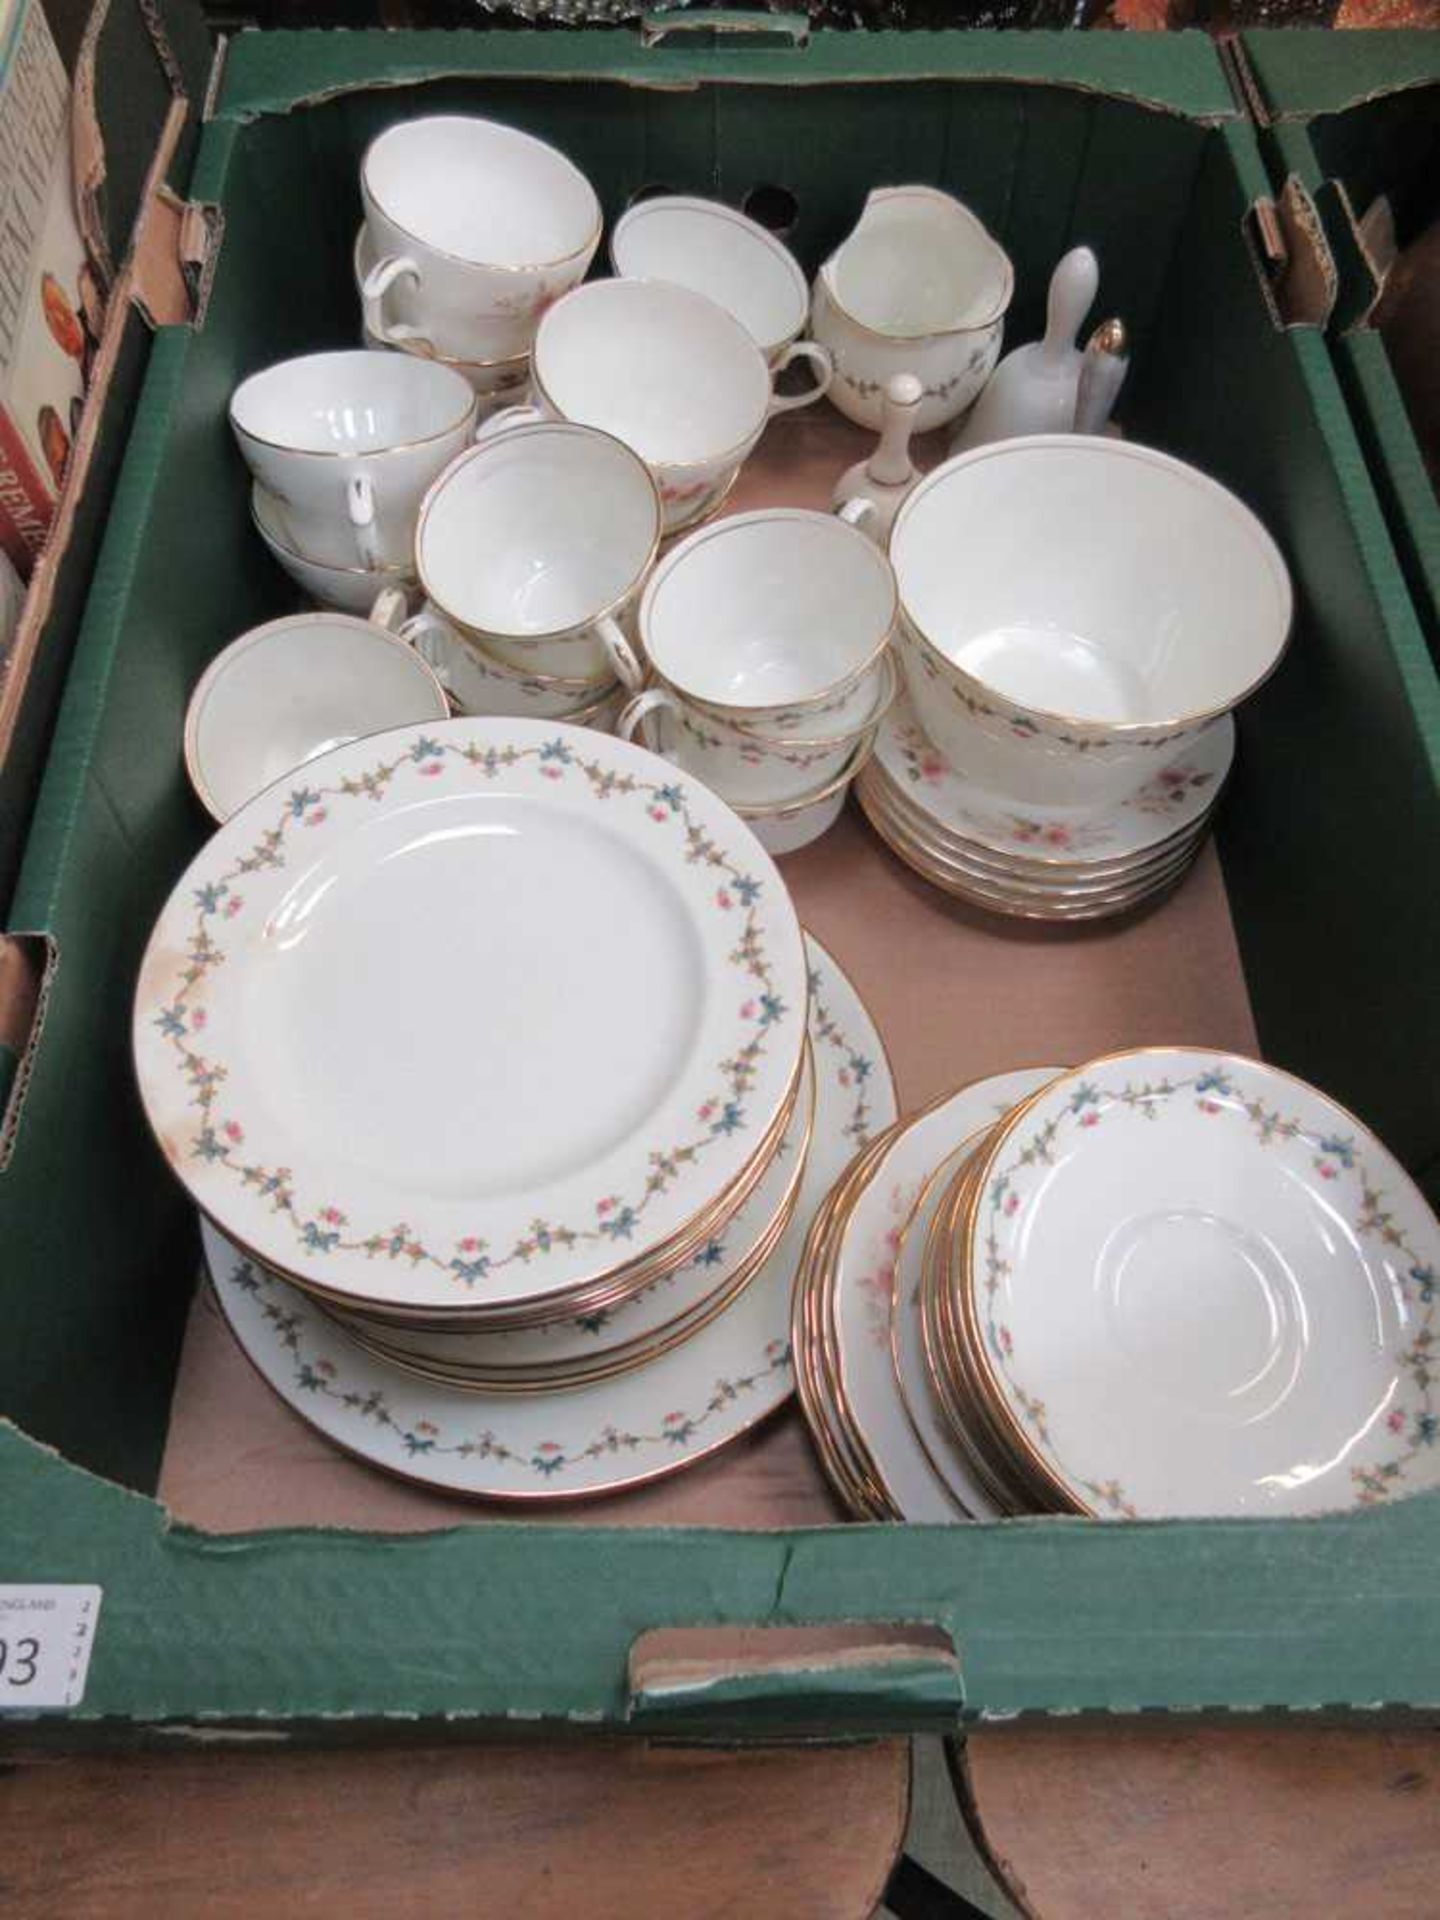 A tray containing a part Aynsley tea service